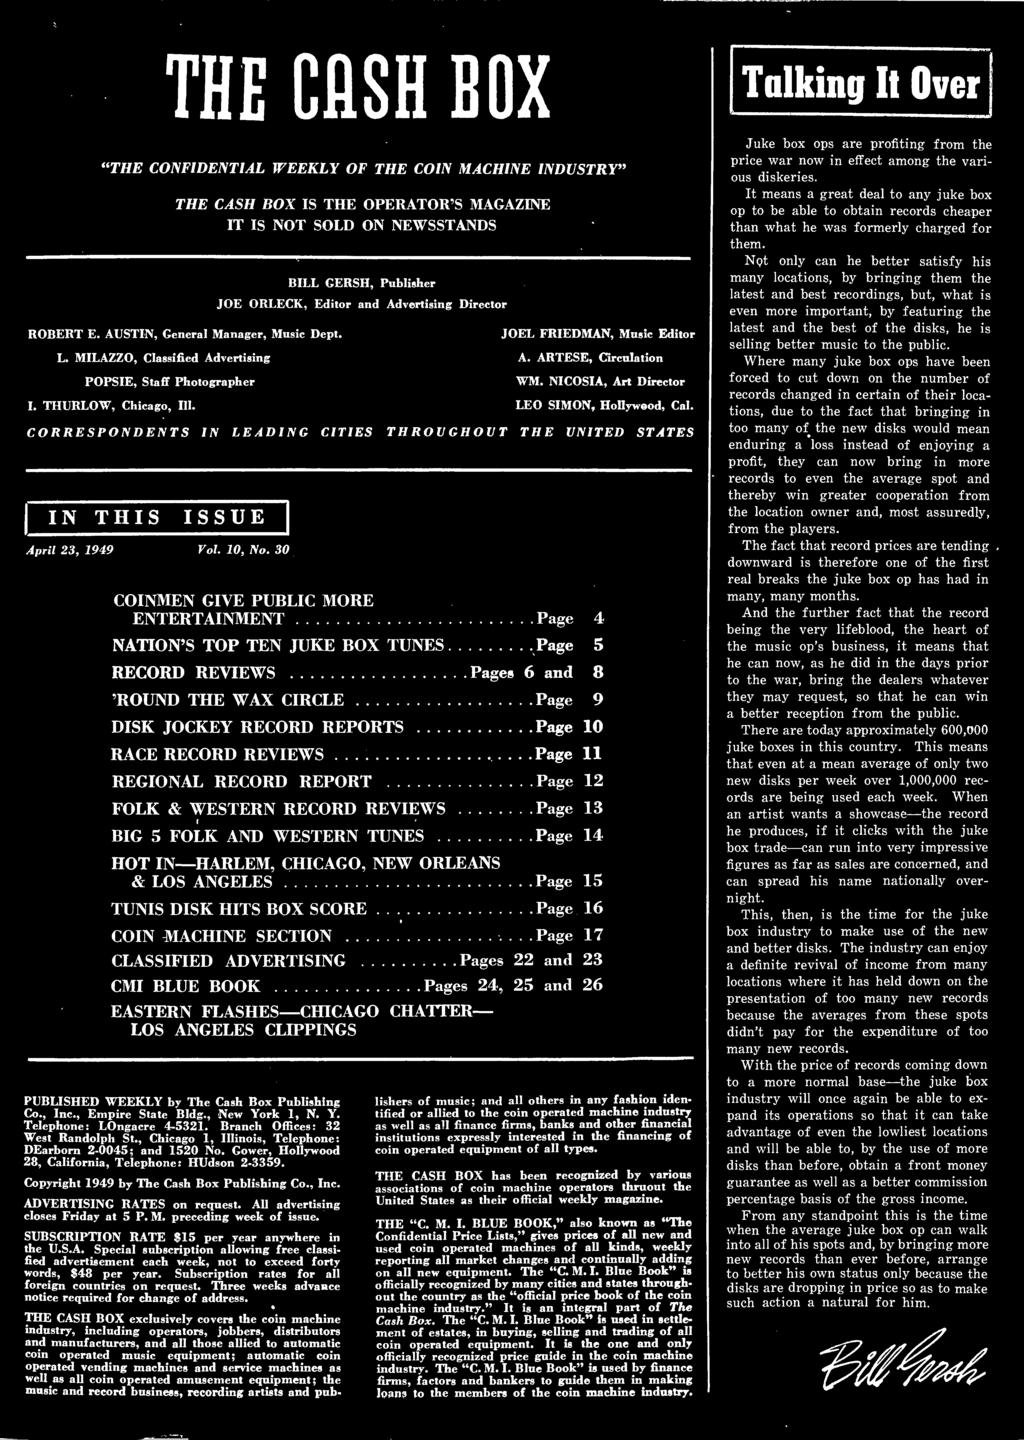 WESTERN TUNES Page 14 HOT N HARLEM, CHCAGO, NEW ORLEANS & LOS ANGELES Page 15 TUNS DSK HTS BOX SCORE Page 16 CON MACHNE SECTON Page 17 CLASSFED ADVERTSNG Pages 22 and 23 CM BLUE BOOK Pages 24, 25 and